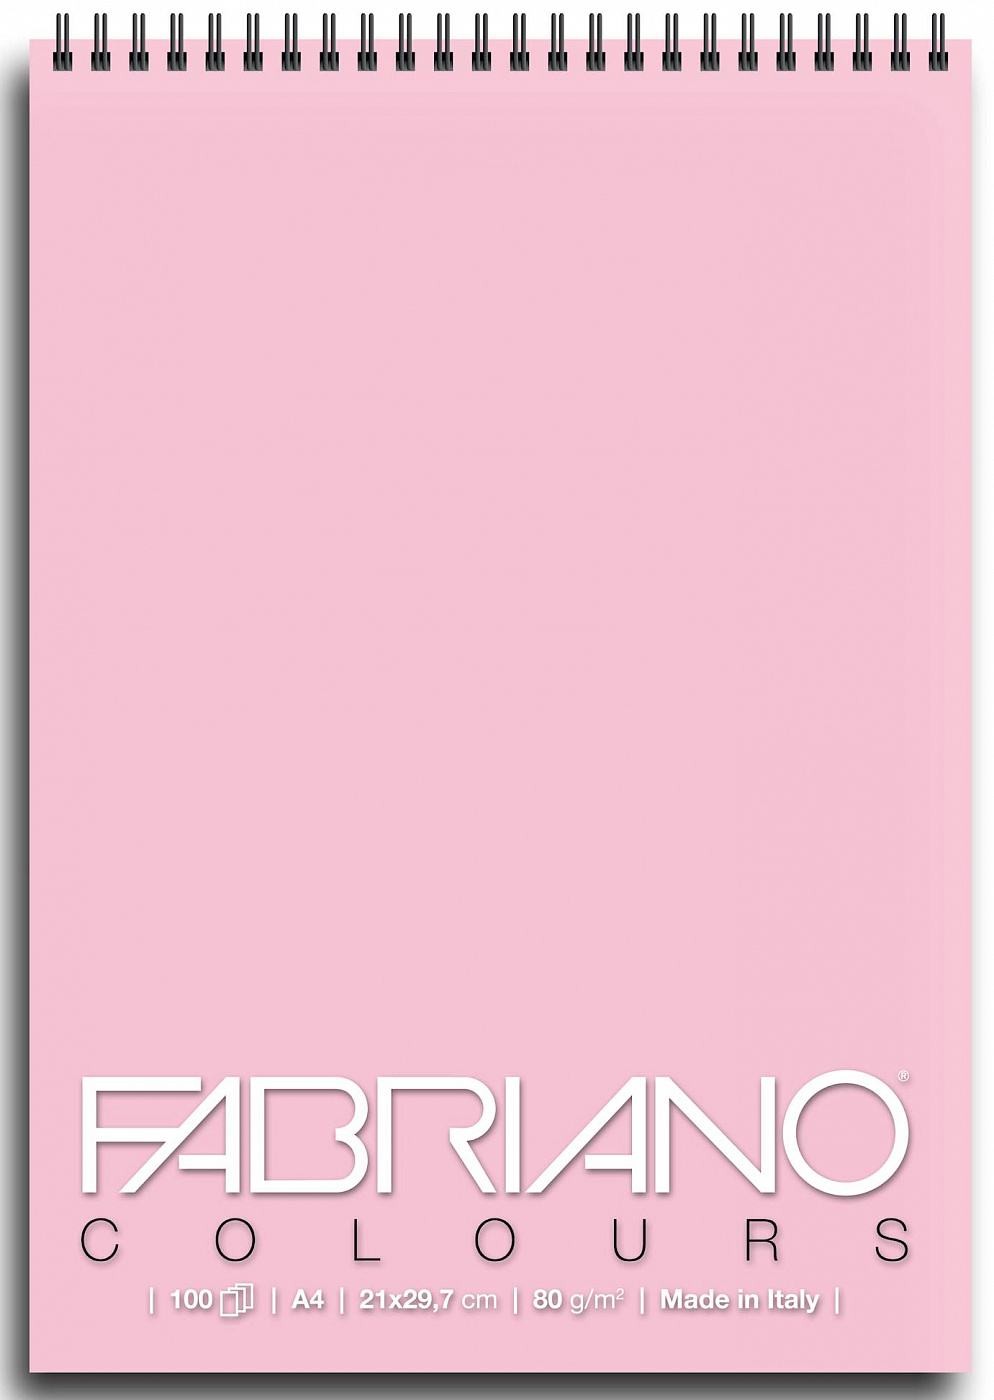      Fabriano Writing Colors 2129, 7  100  80  